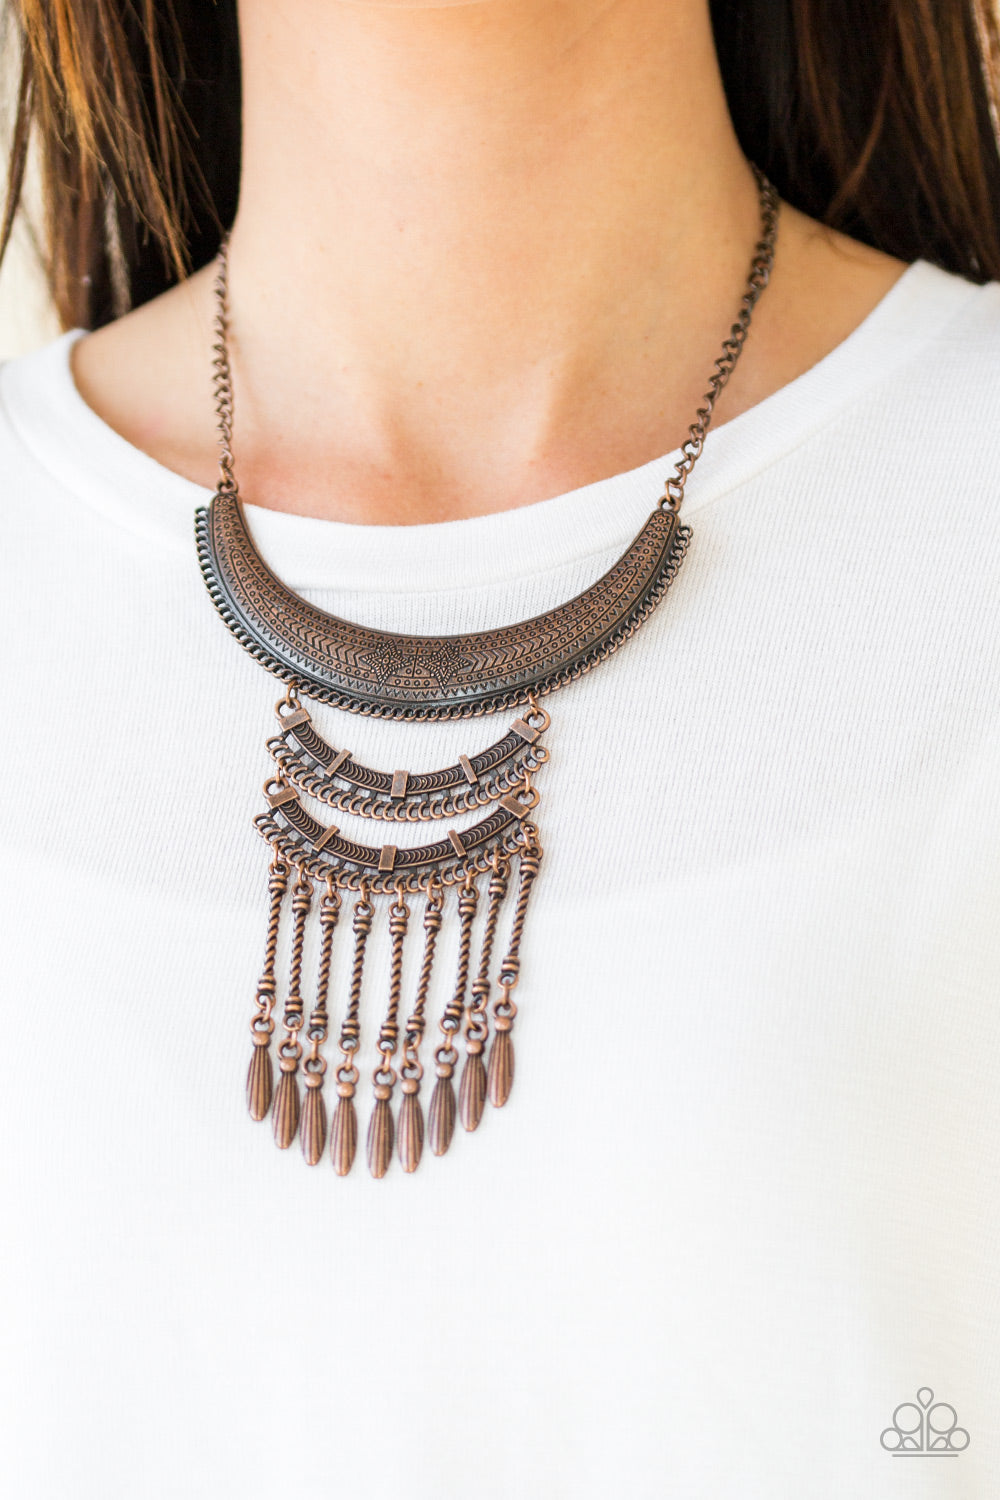 Eastern Empress Copper Necklace - Paparazzi Accessories - Stamped and embossed in tribal inspired patterns, three copper plates connect down the chest, creating a fiercely stacked pendant. Attached to twisted copper rods, ornate copper beads swing from the bottom of the lowermost plate, creating an eye-catching fringe.